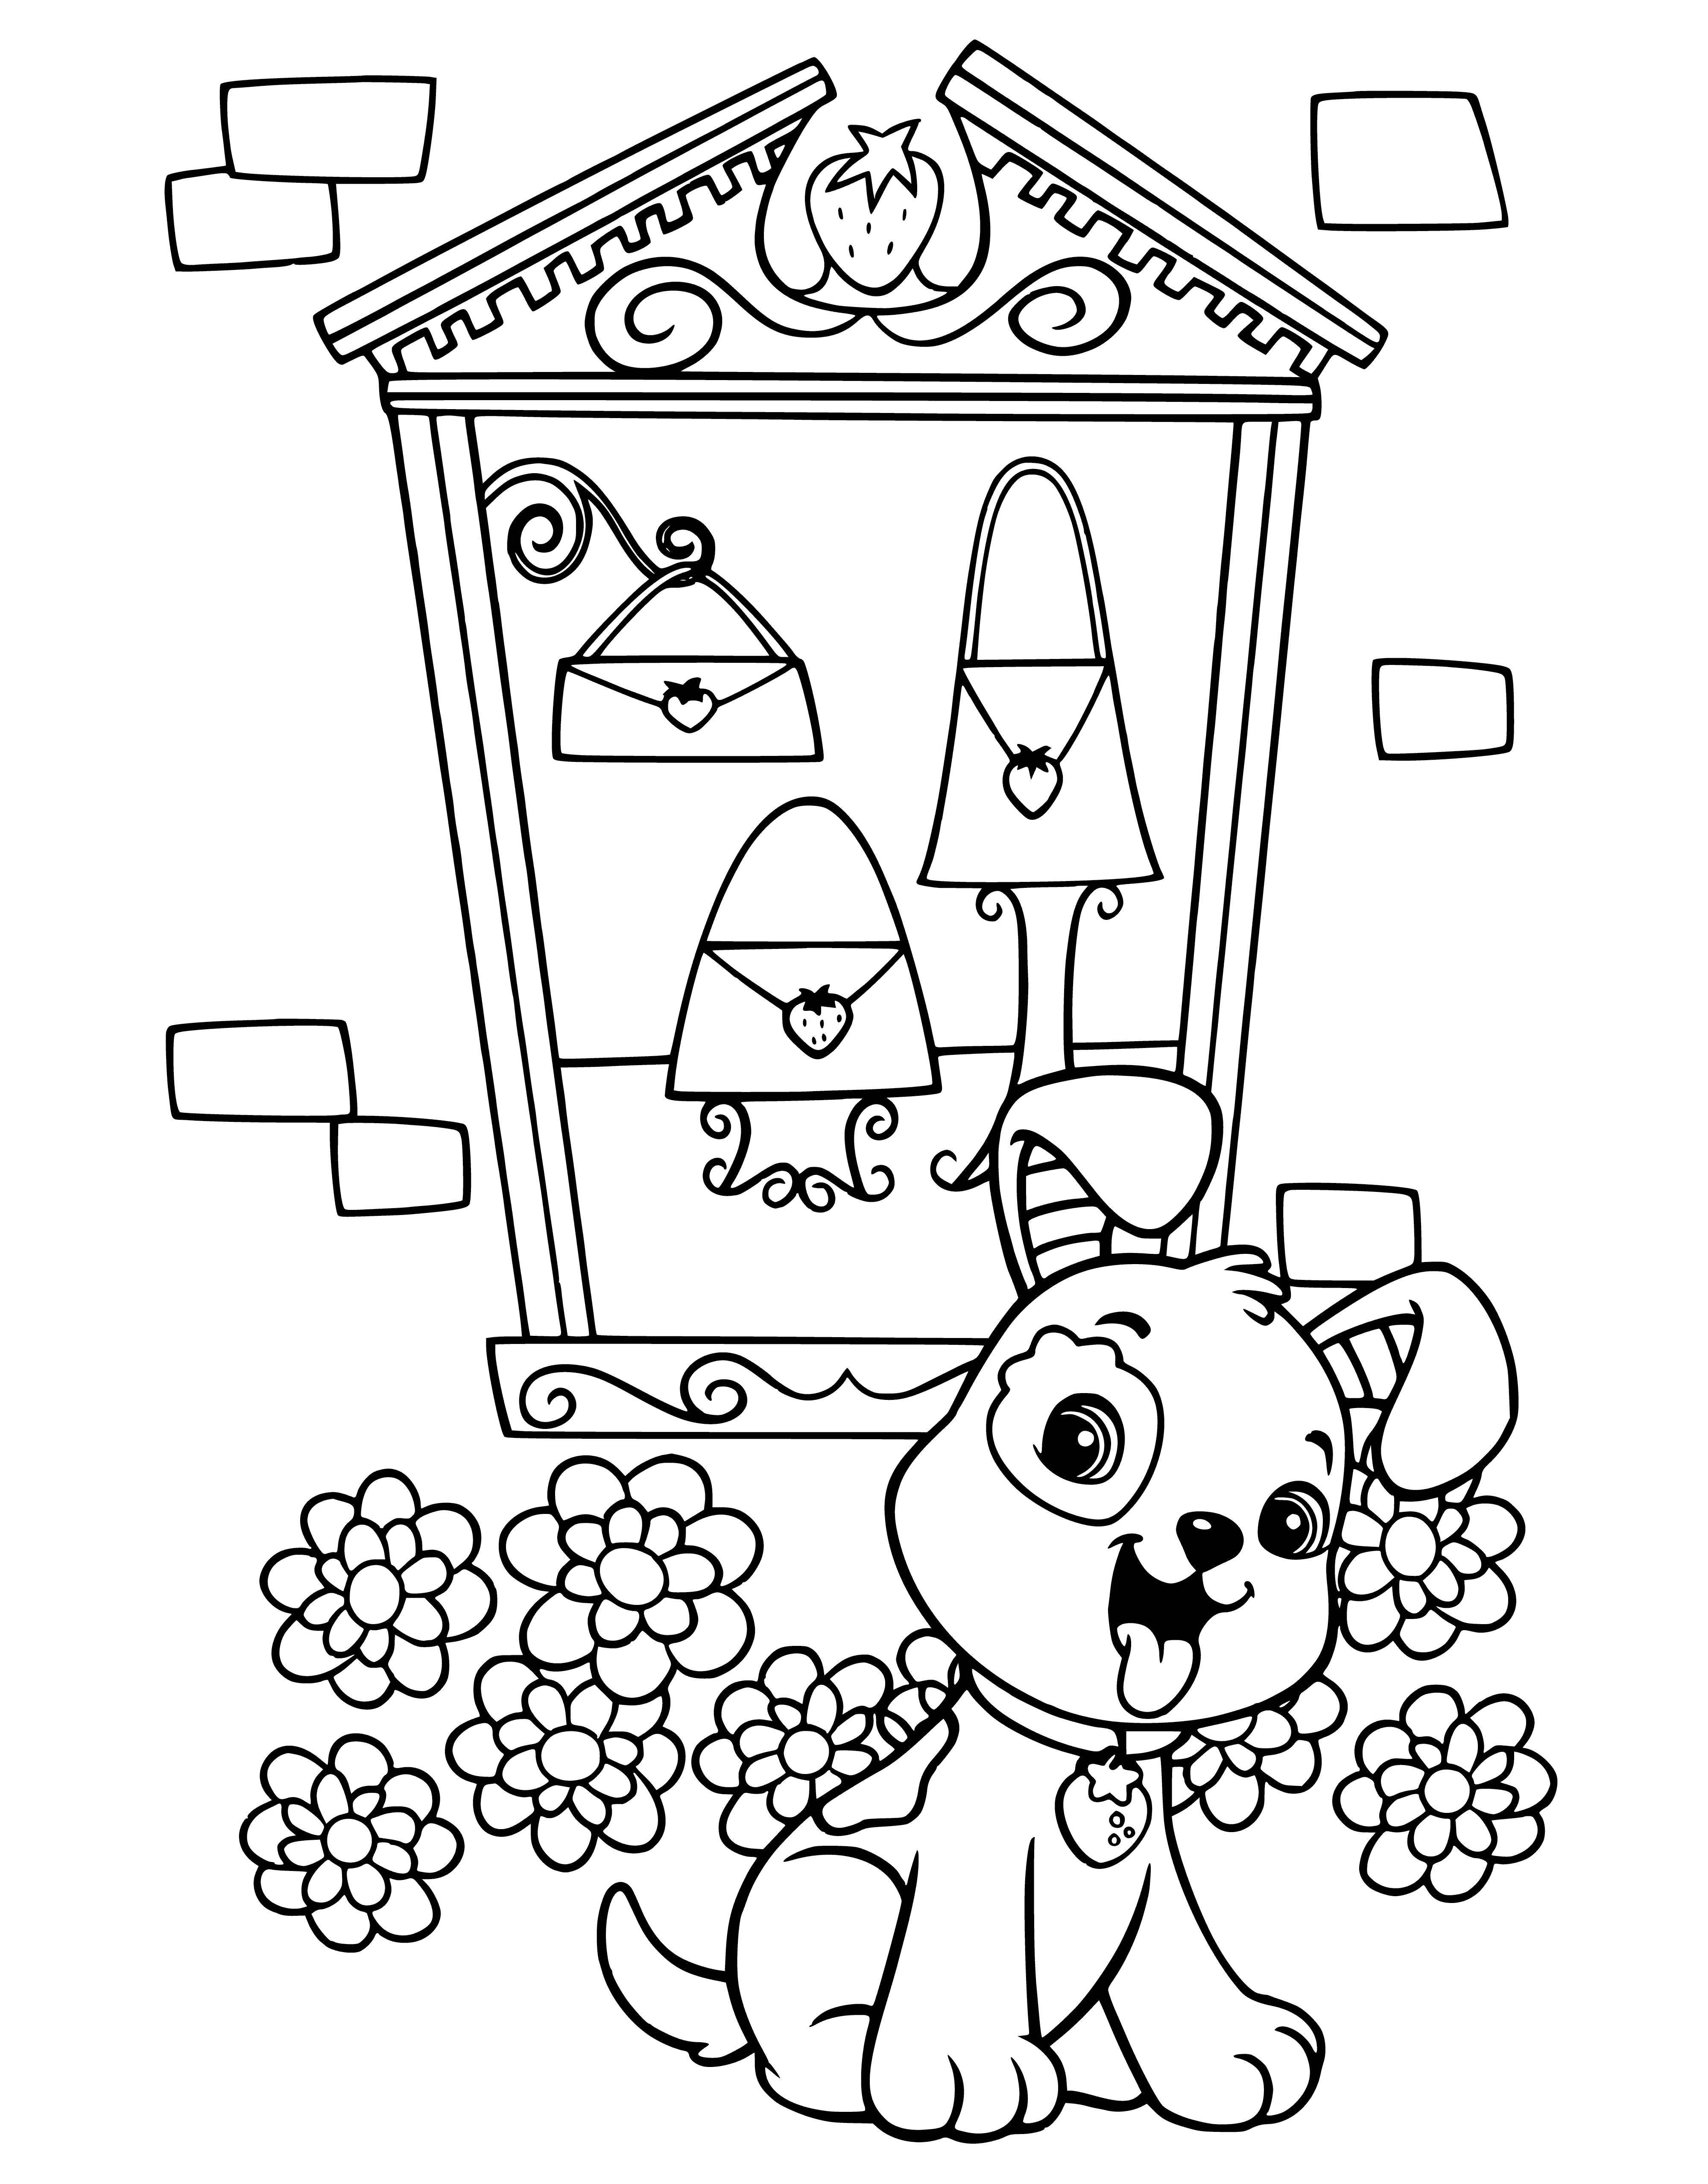 coloring page: Brown & white puppy on yellow blanket, strawberry with bite taken out to left. Purple & white striped bg completing the coloring page. #cute